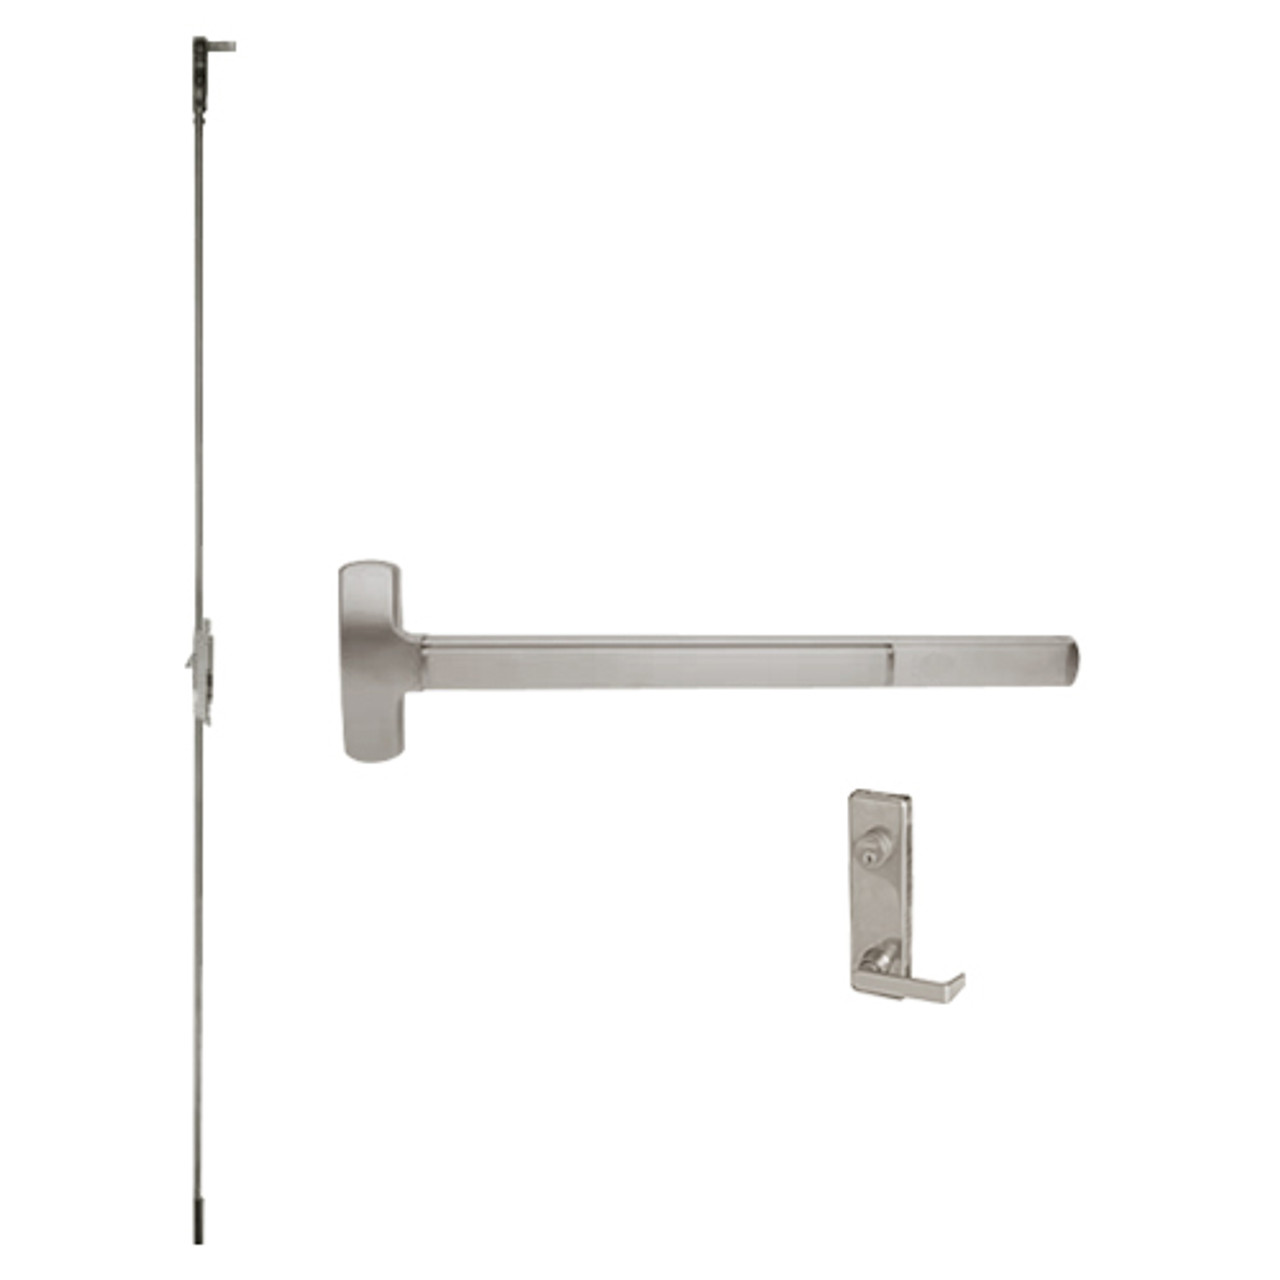 F-25-C-L-NL-DANE-US32D-2-LHR Falcon Exit Device in Satin Stainless Steel